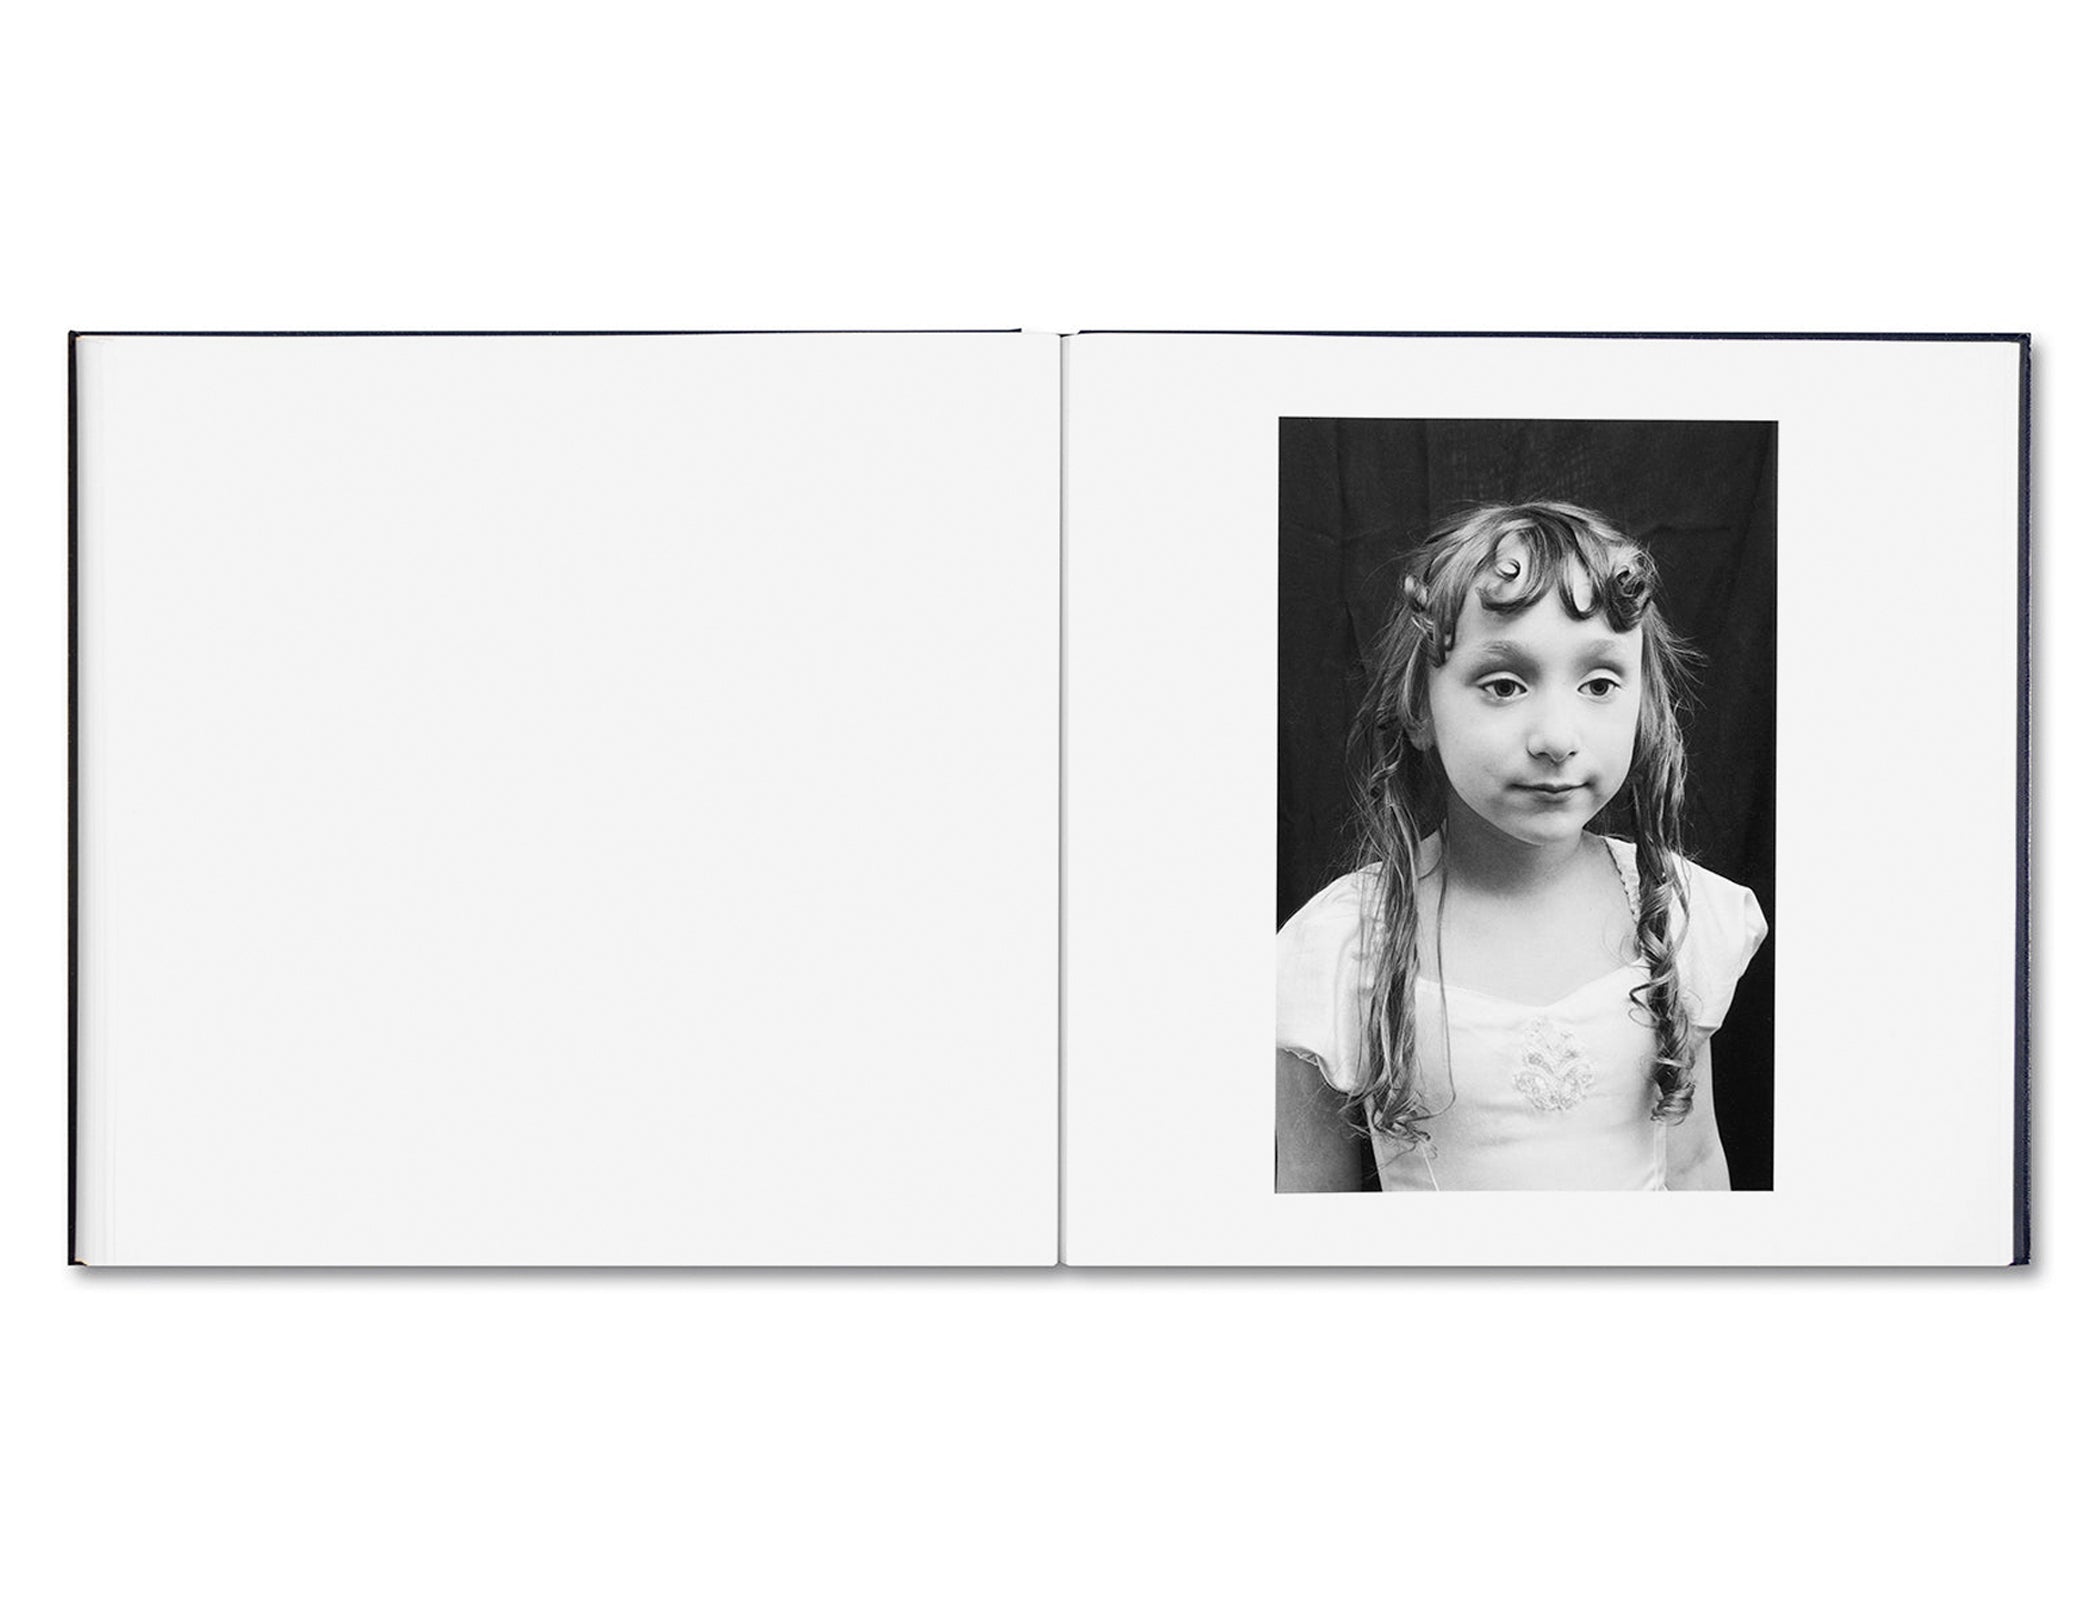 SOME SAY ICE by Alessandra Sanguinetti [DIRECT SIGNED]